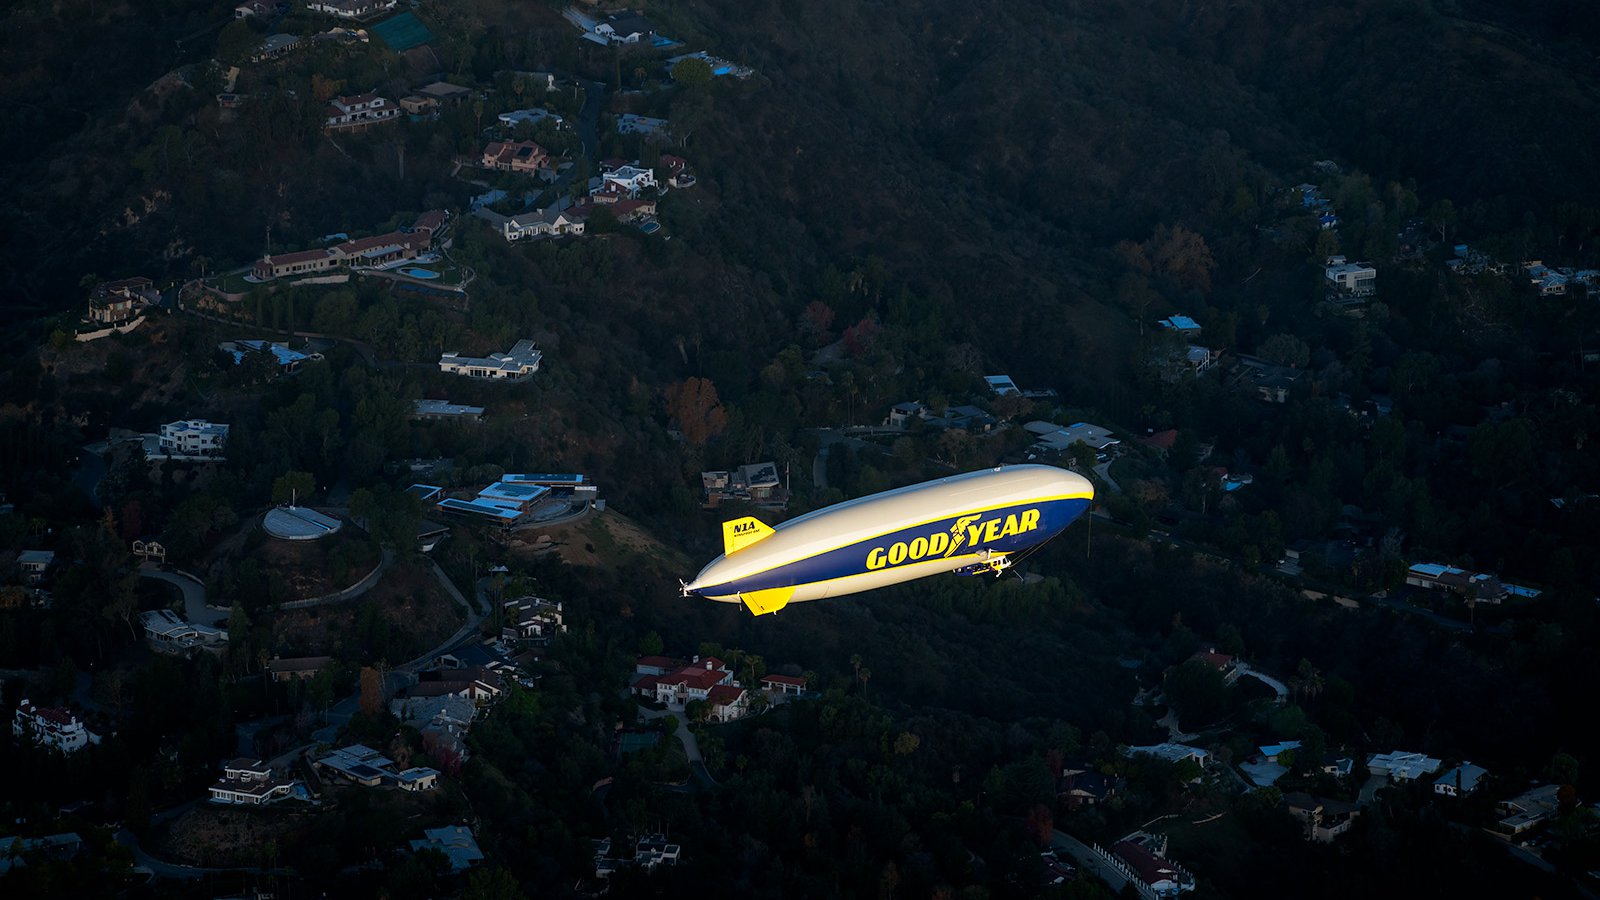 Blog photograph of the Goodyear Blimp flying over a residential neighborhood on January 1st 2022